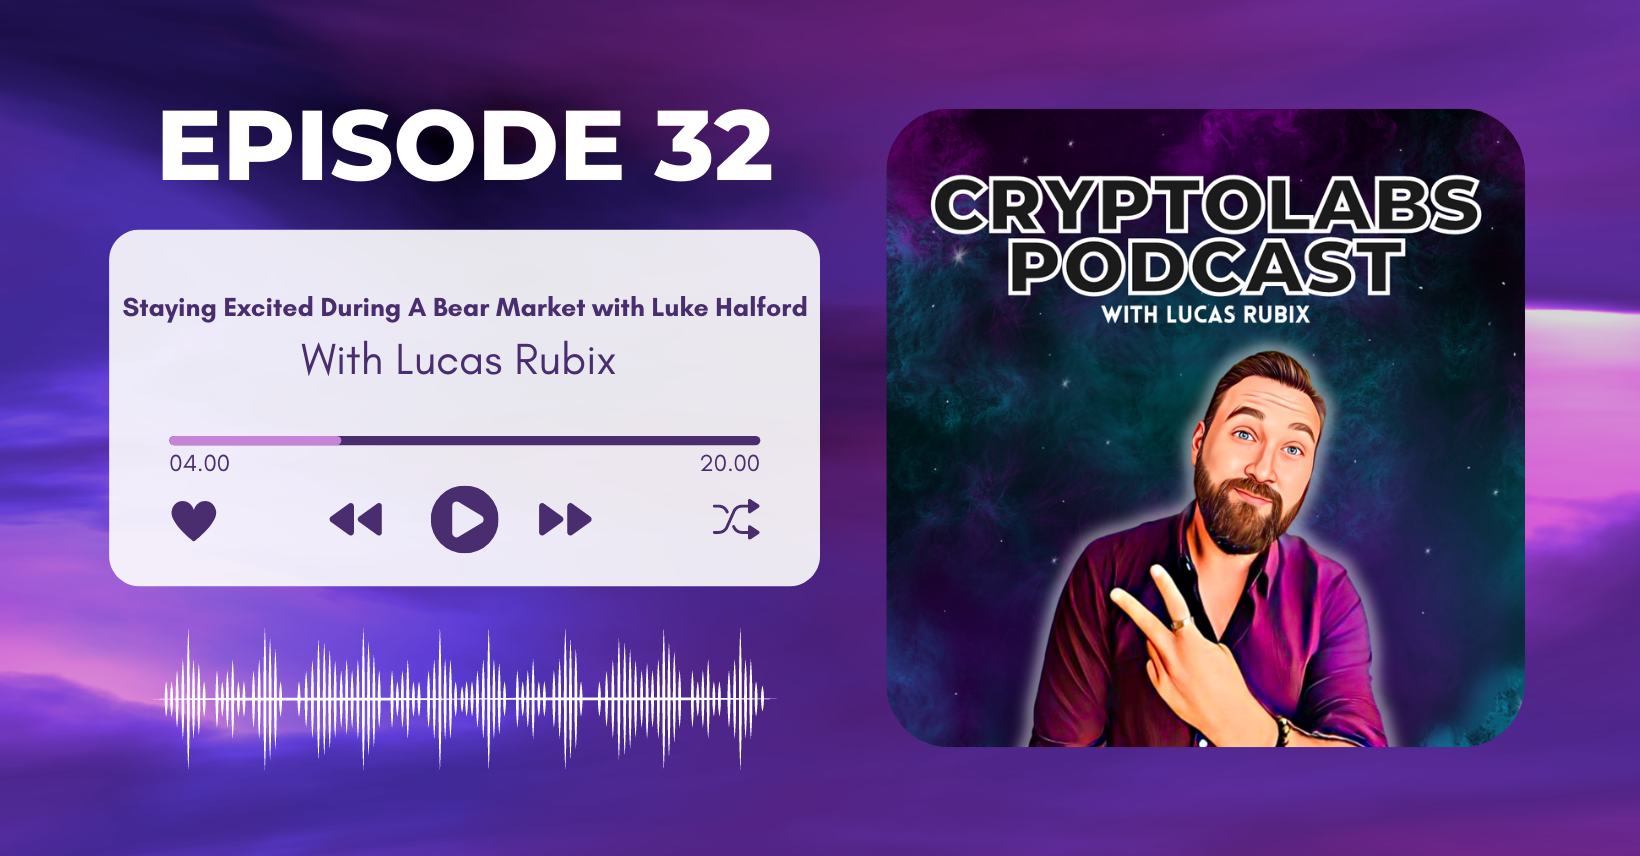 CryptoLabs podcast with Lucas Rubix